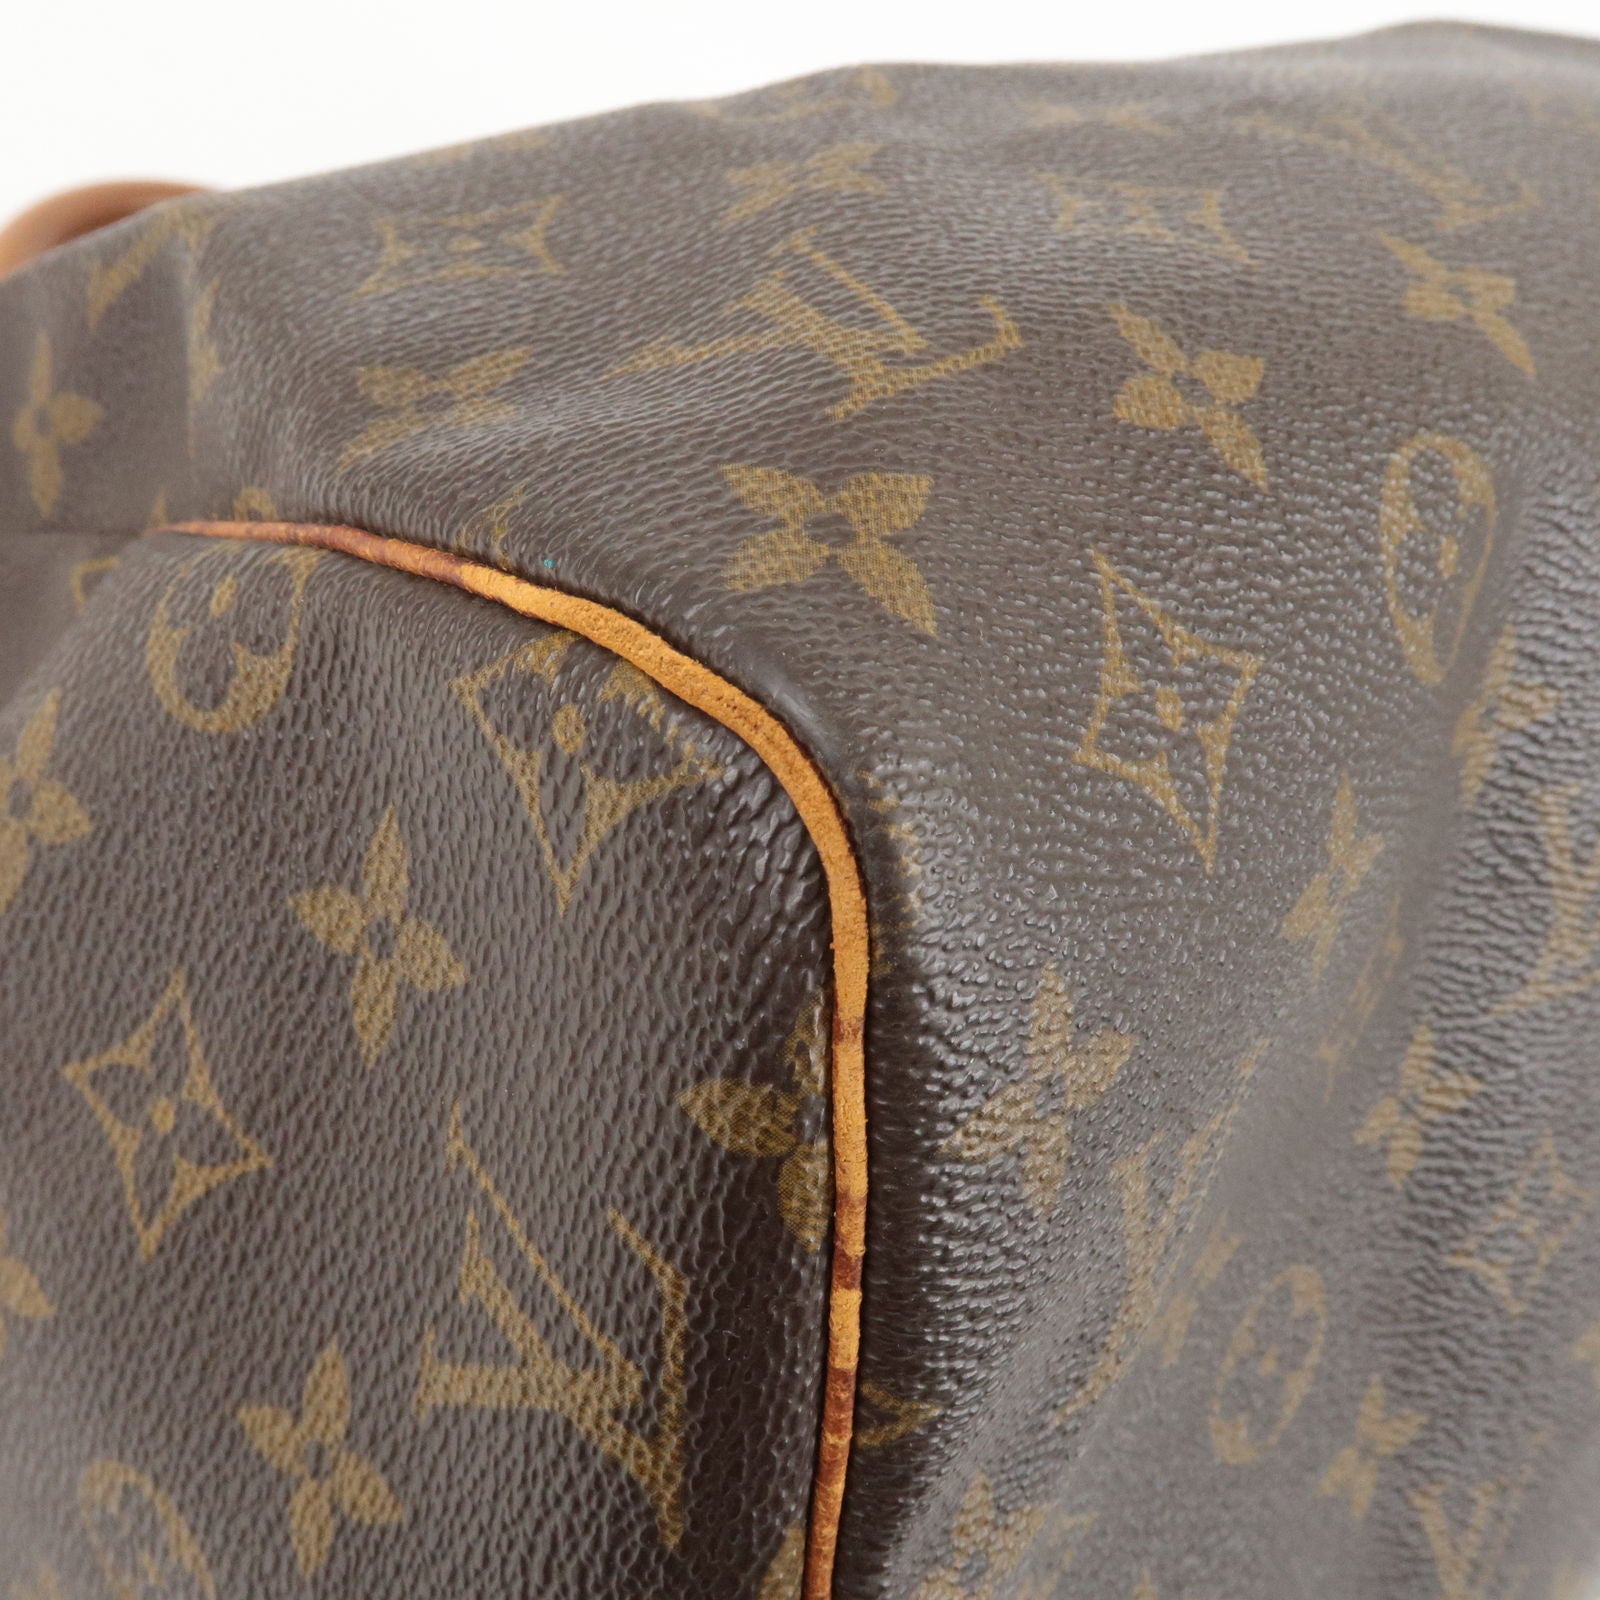 Neverfull - ep_vintage luxury Store - Vuitton - Tote - Bag